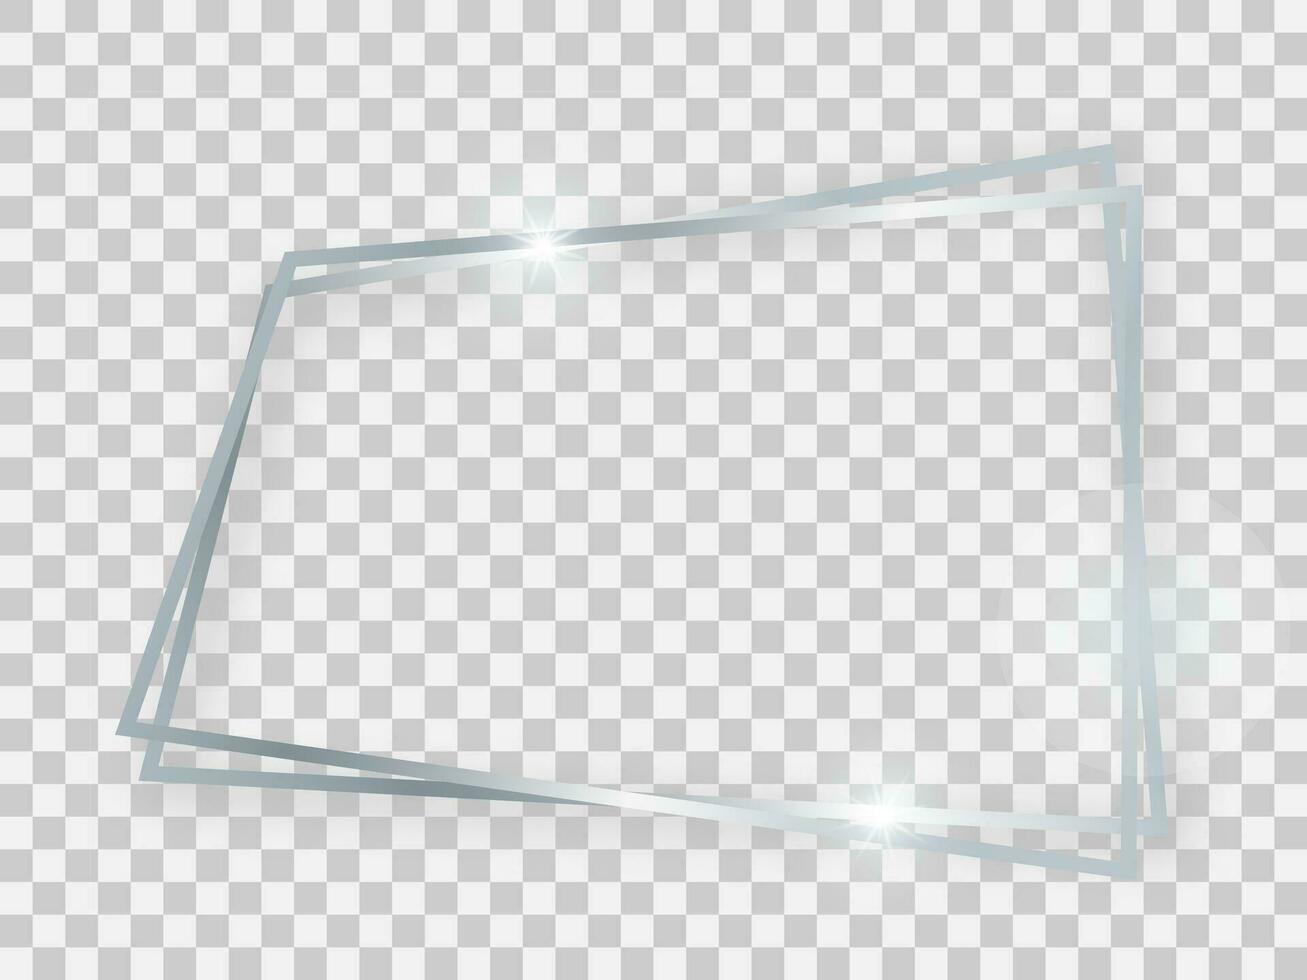 Double silver shiny trapezoid frame with glowing effects and shadows on background. Vector illustration